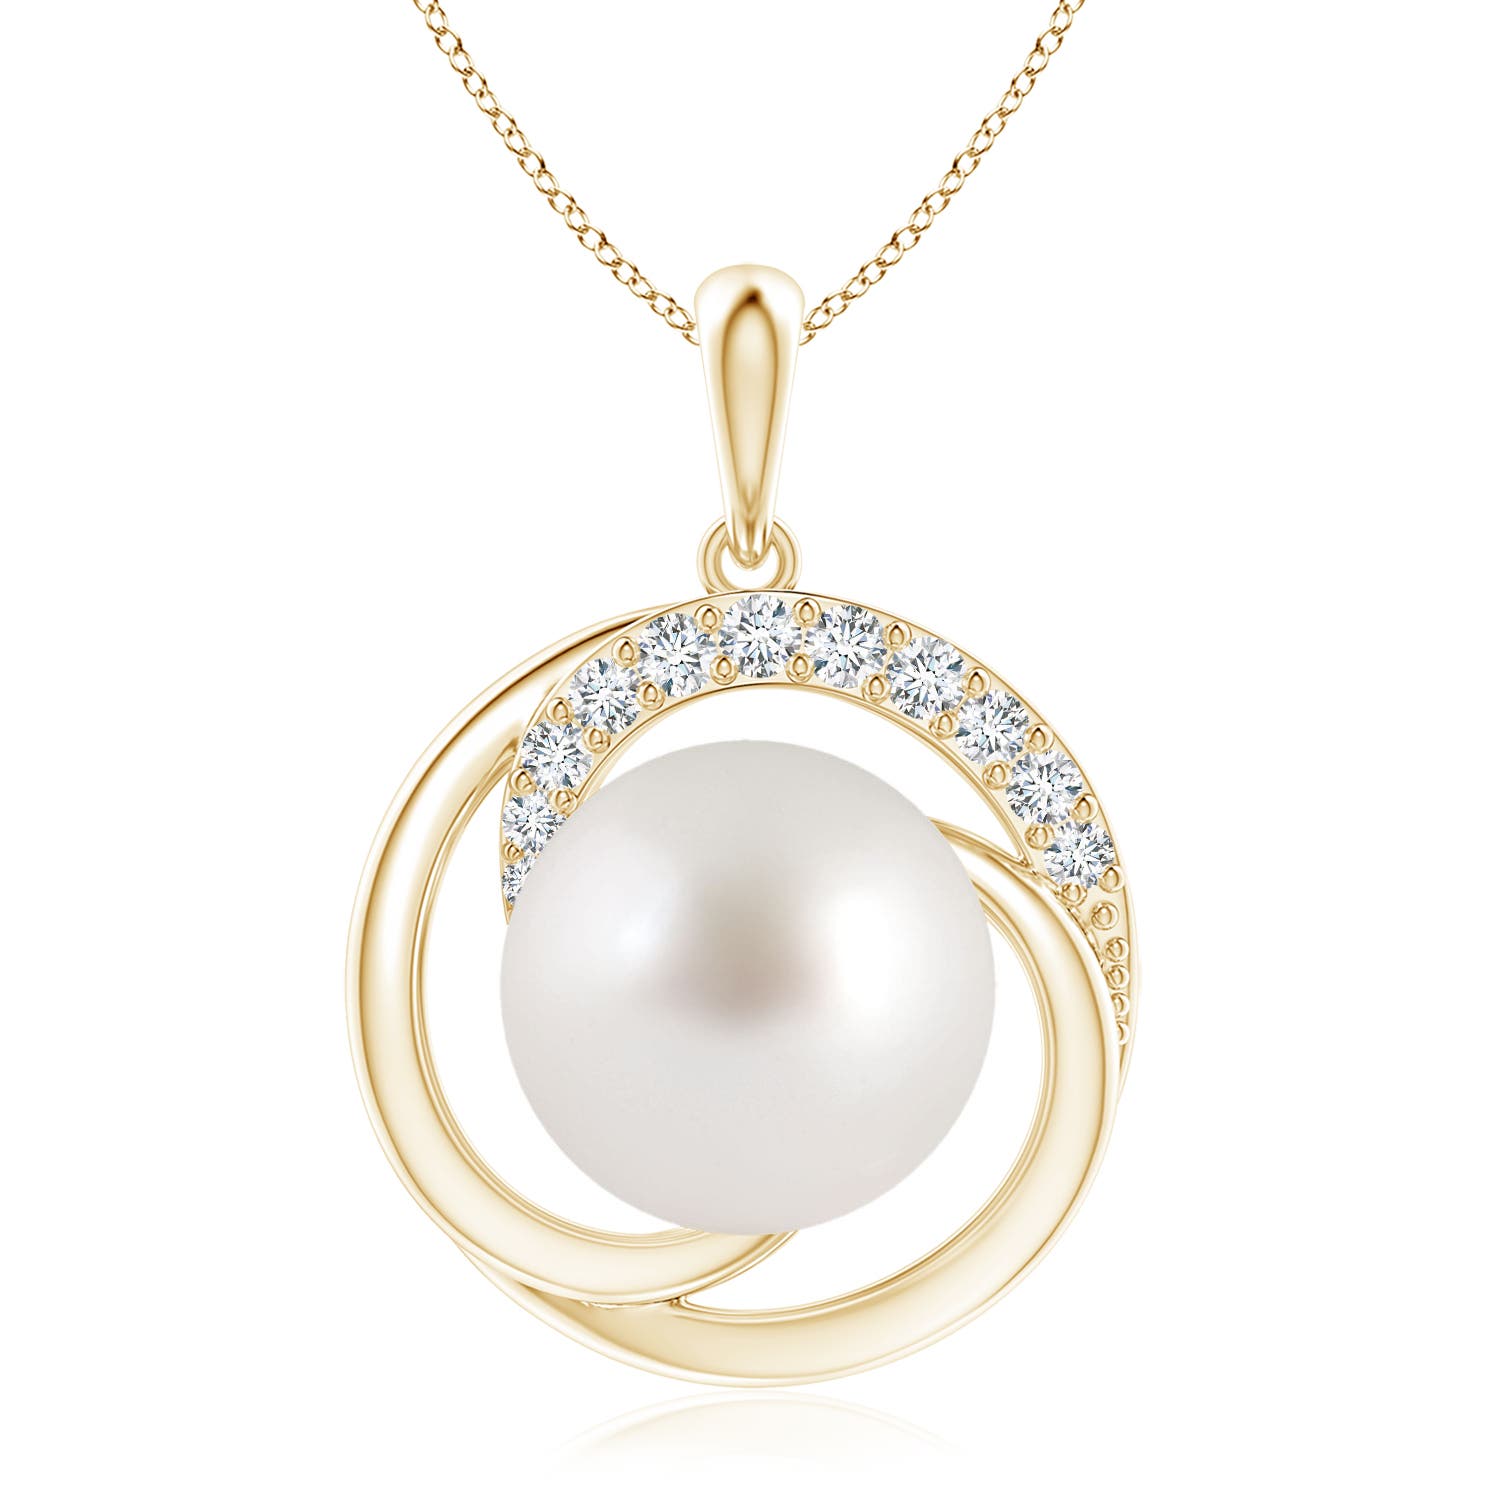 AAA - South Sea Cultured Pearl / 9.76 CT / 14 KT Yellow Gold